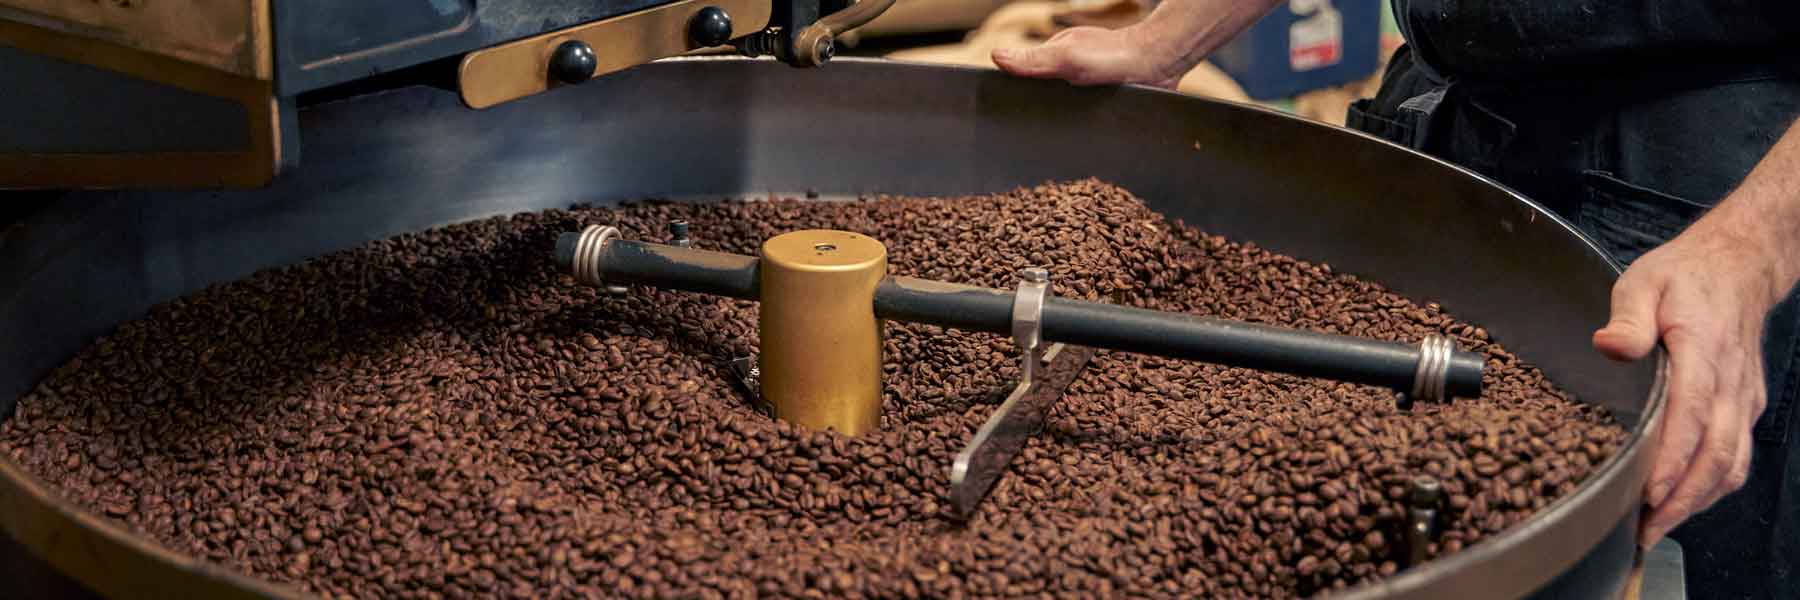 Seven Coffee Small-Batch Roasted Coffee